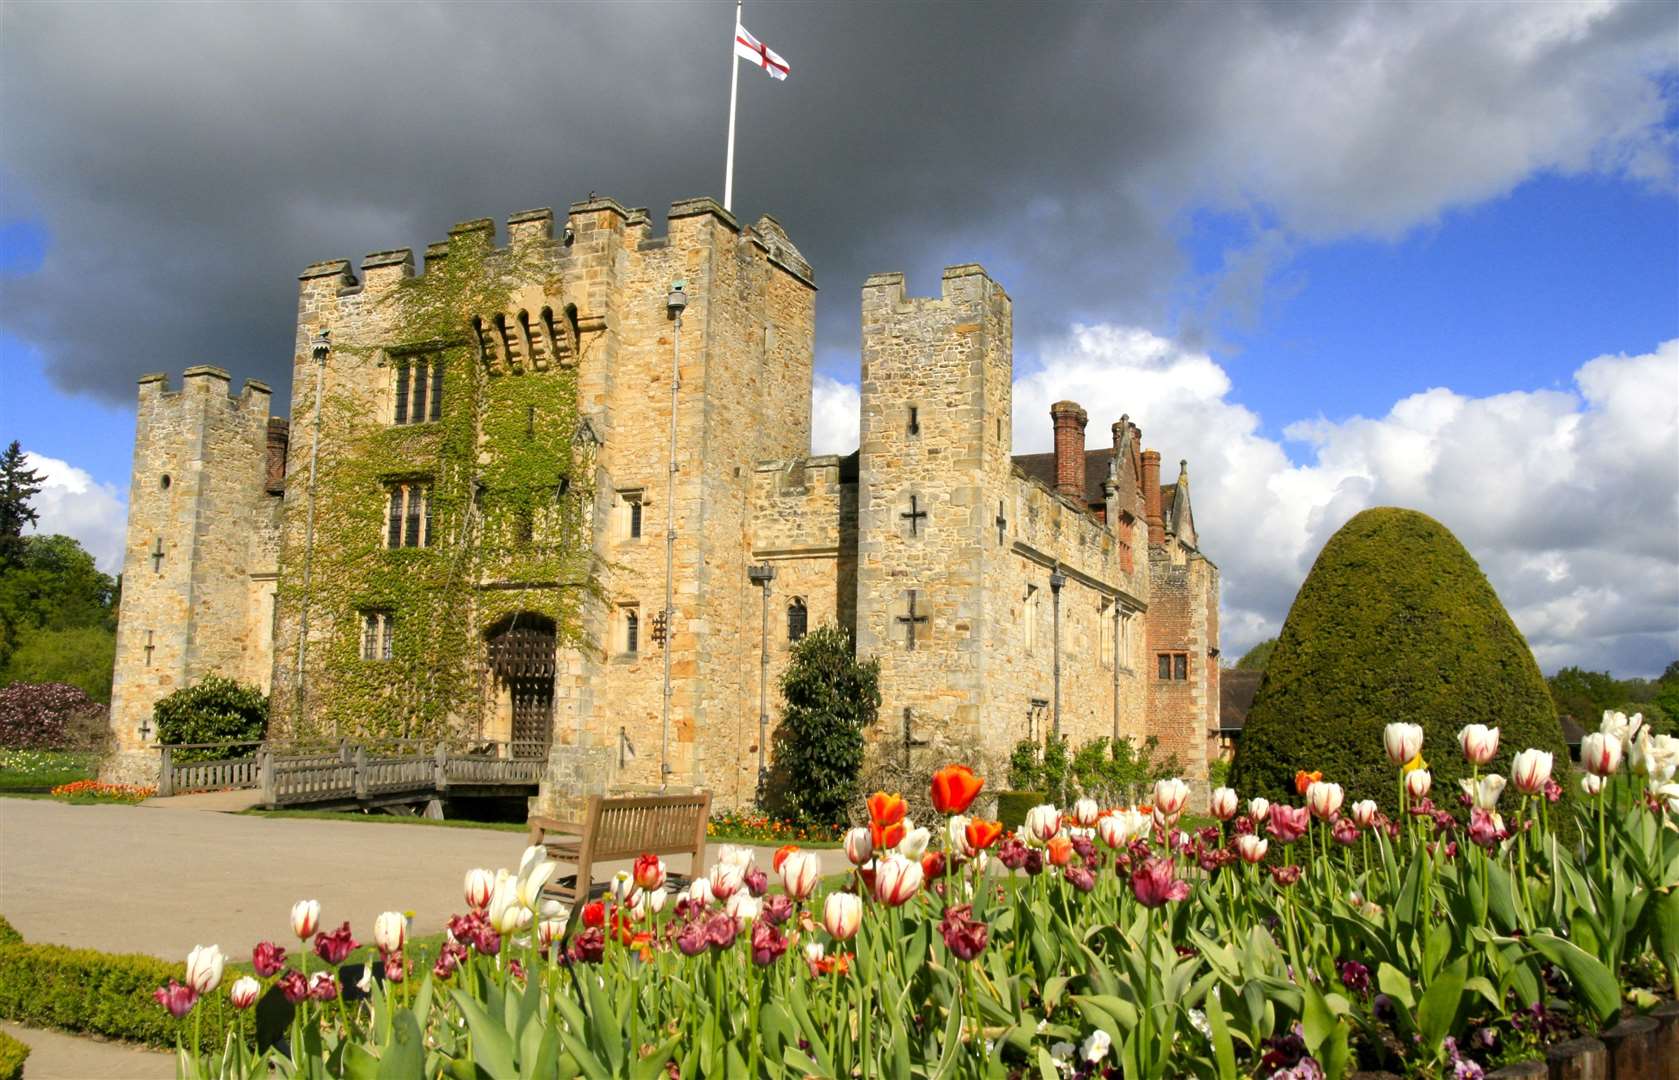 Tulips are blooming early at Hever Castle